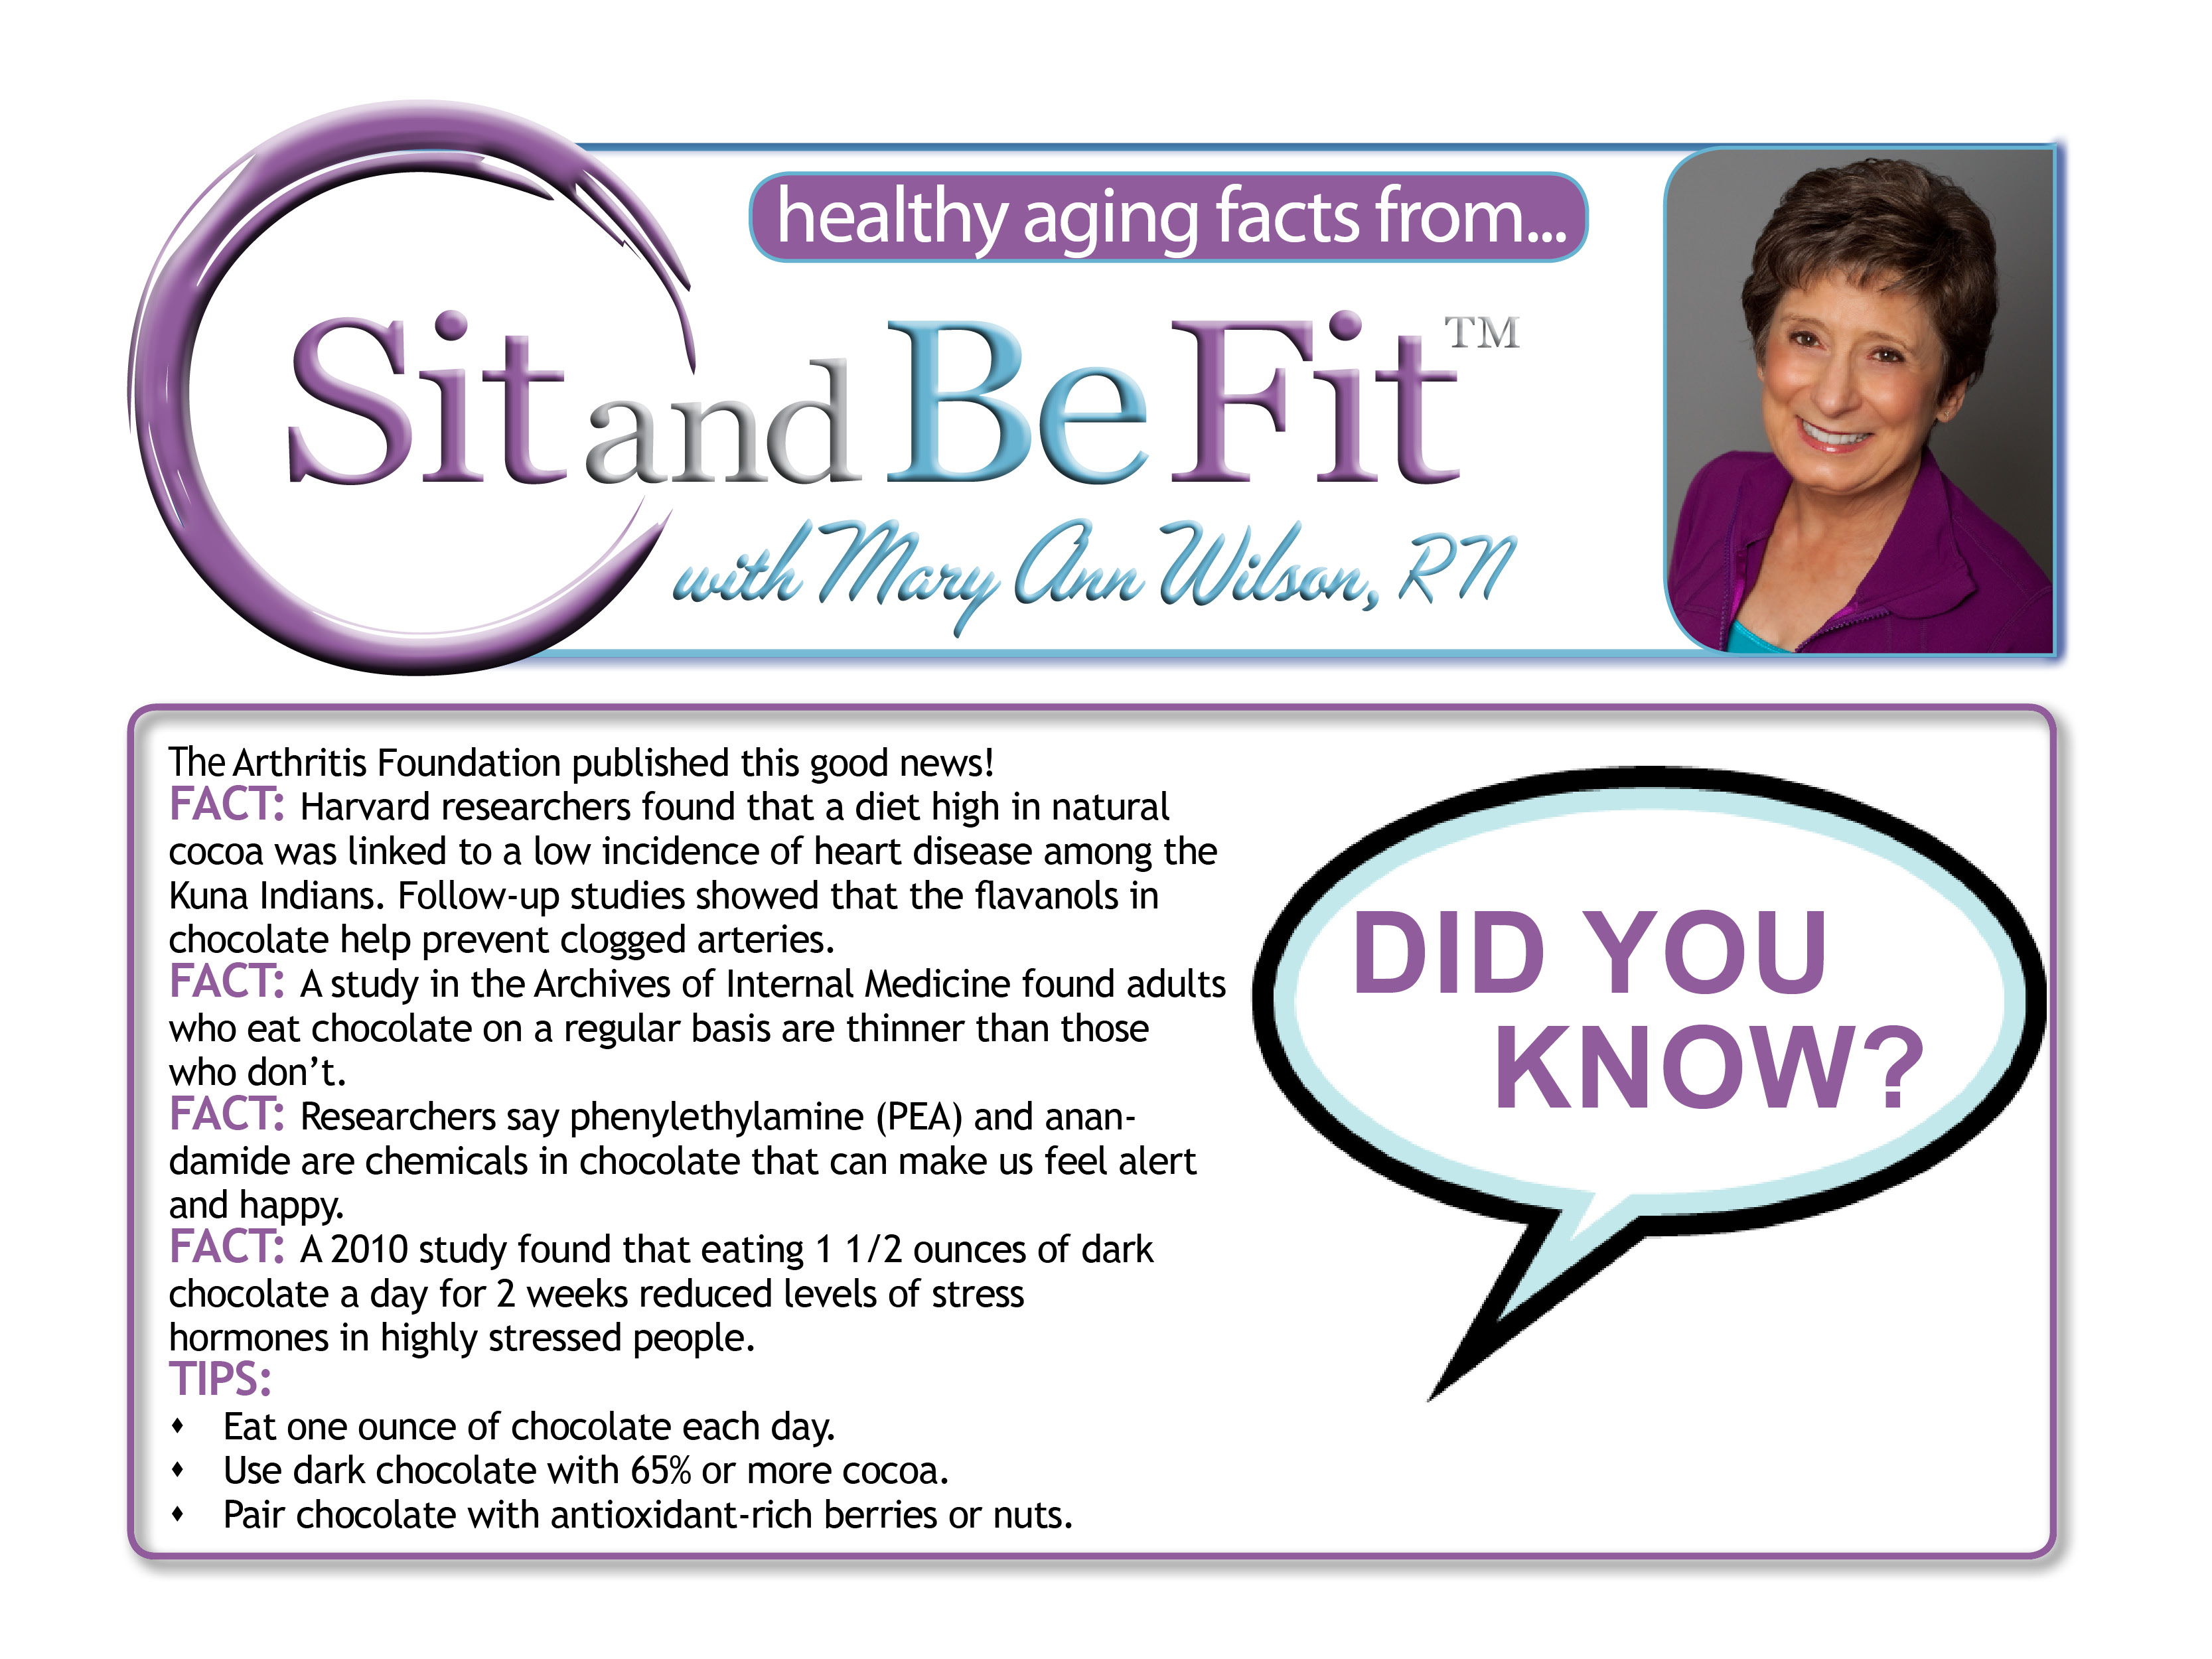 Sit and Be Fit TV host, Mary Ann Wilson, RN, shares a healthy aging tip about the benefits of chocolate.